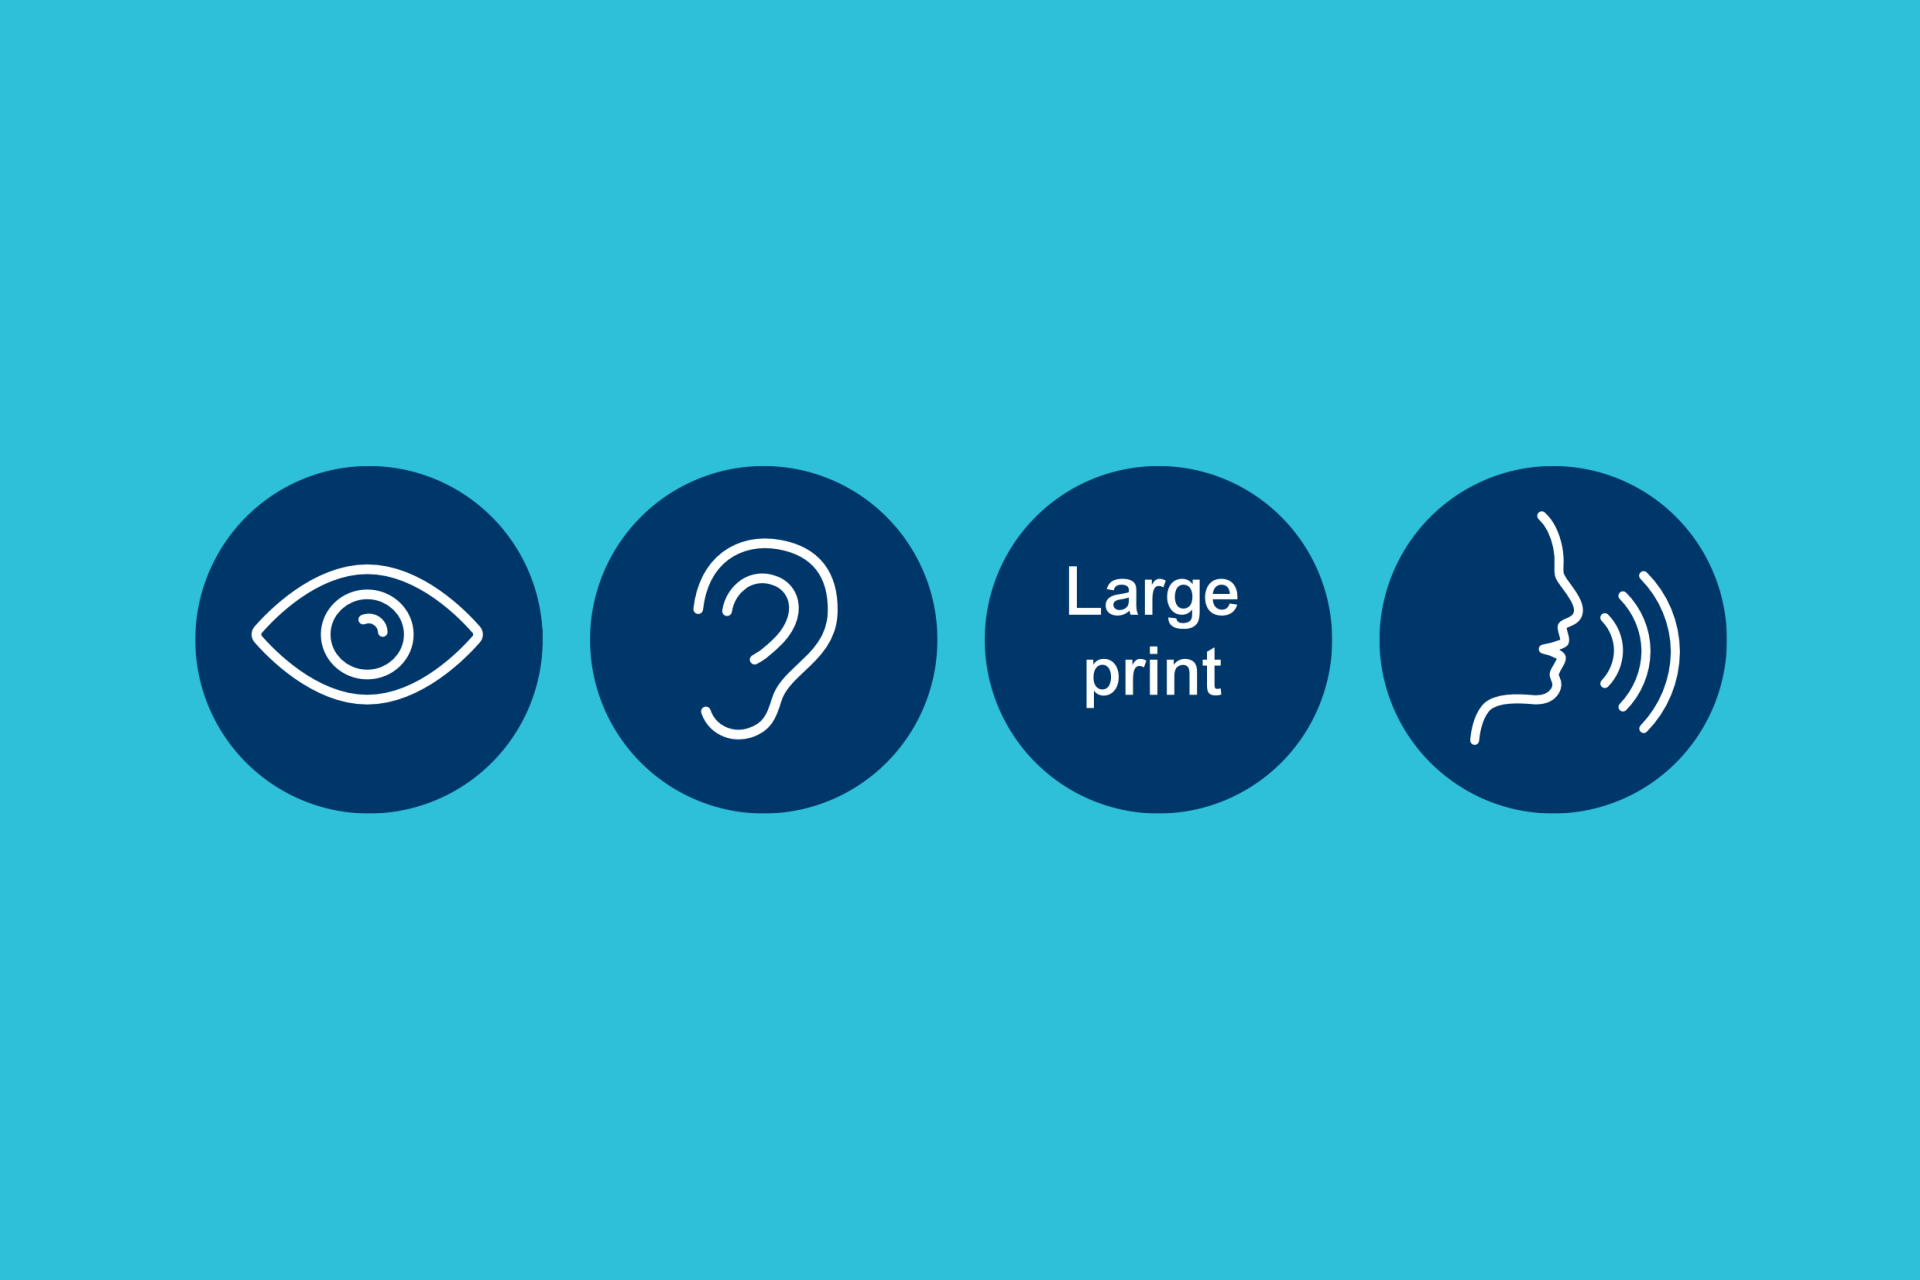 4 accessibility icons depicting an eye, an ear, Large Print and a face speaking